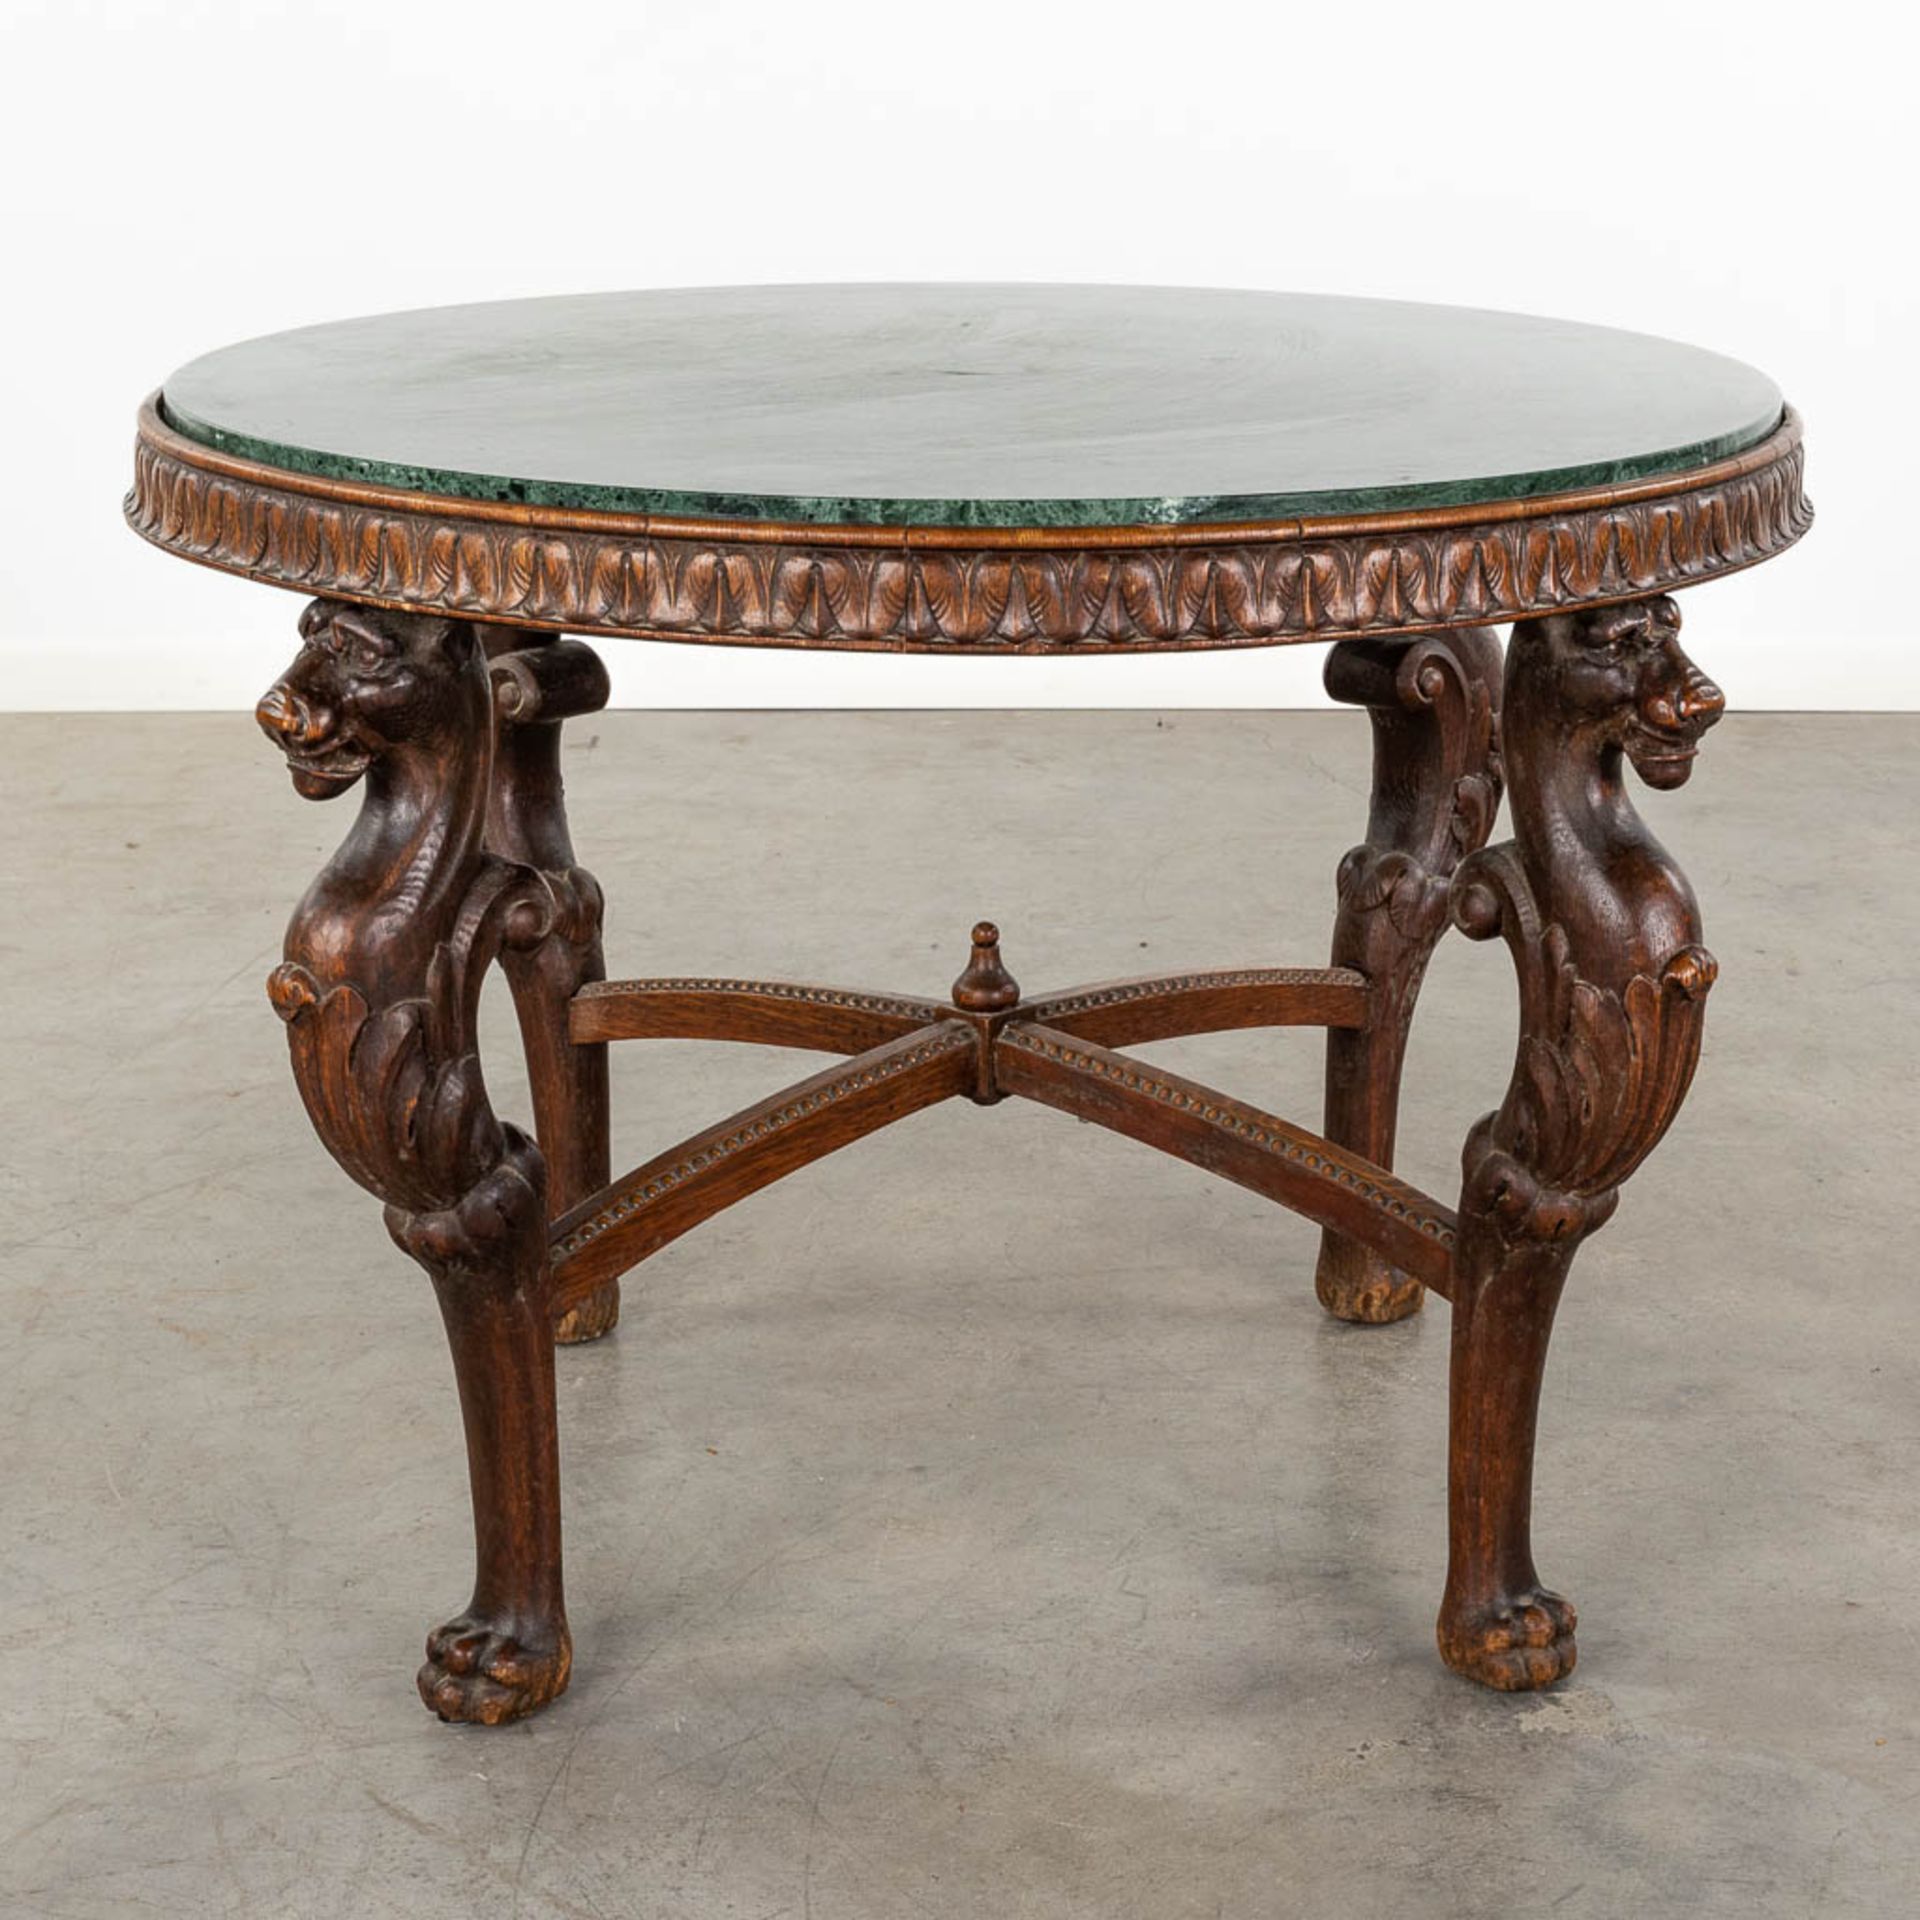 A wood-sculptured coffee table, mythological figurines and a green marble top. 20th C. (D:93 x W:93  - Bild 4 aus 13